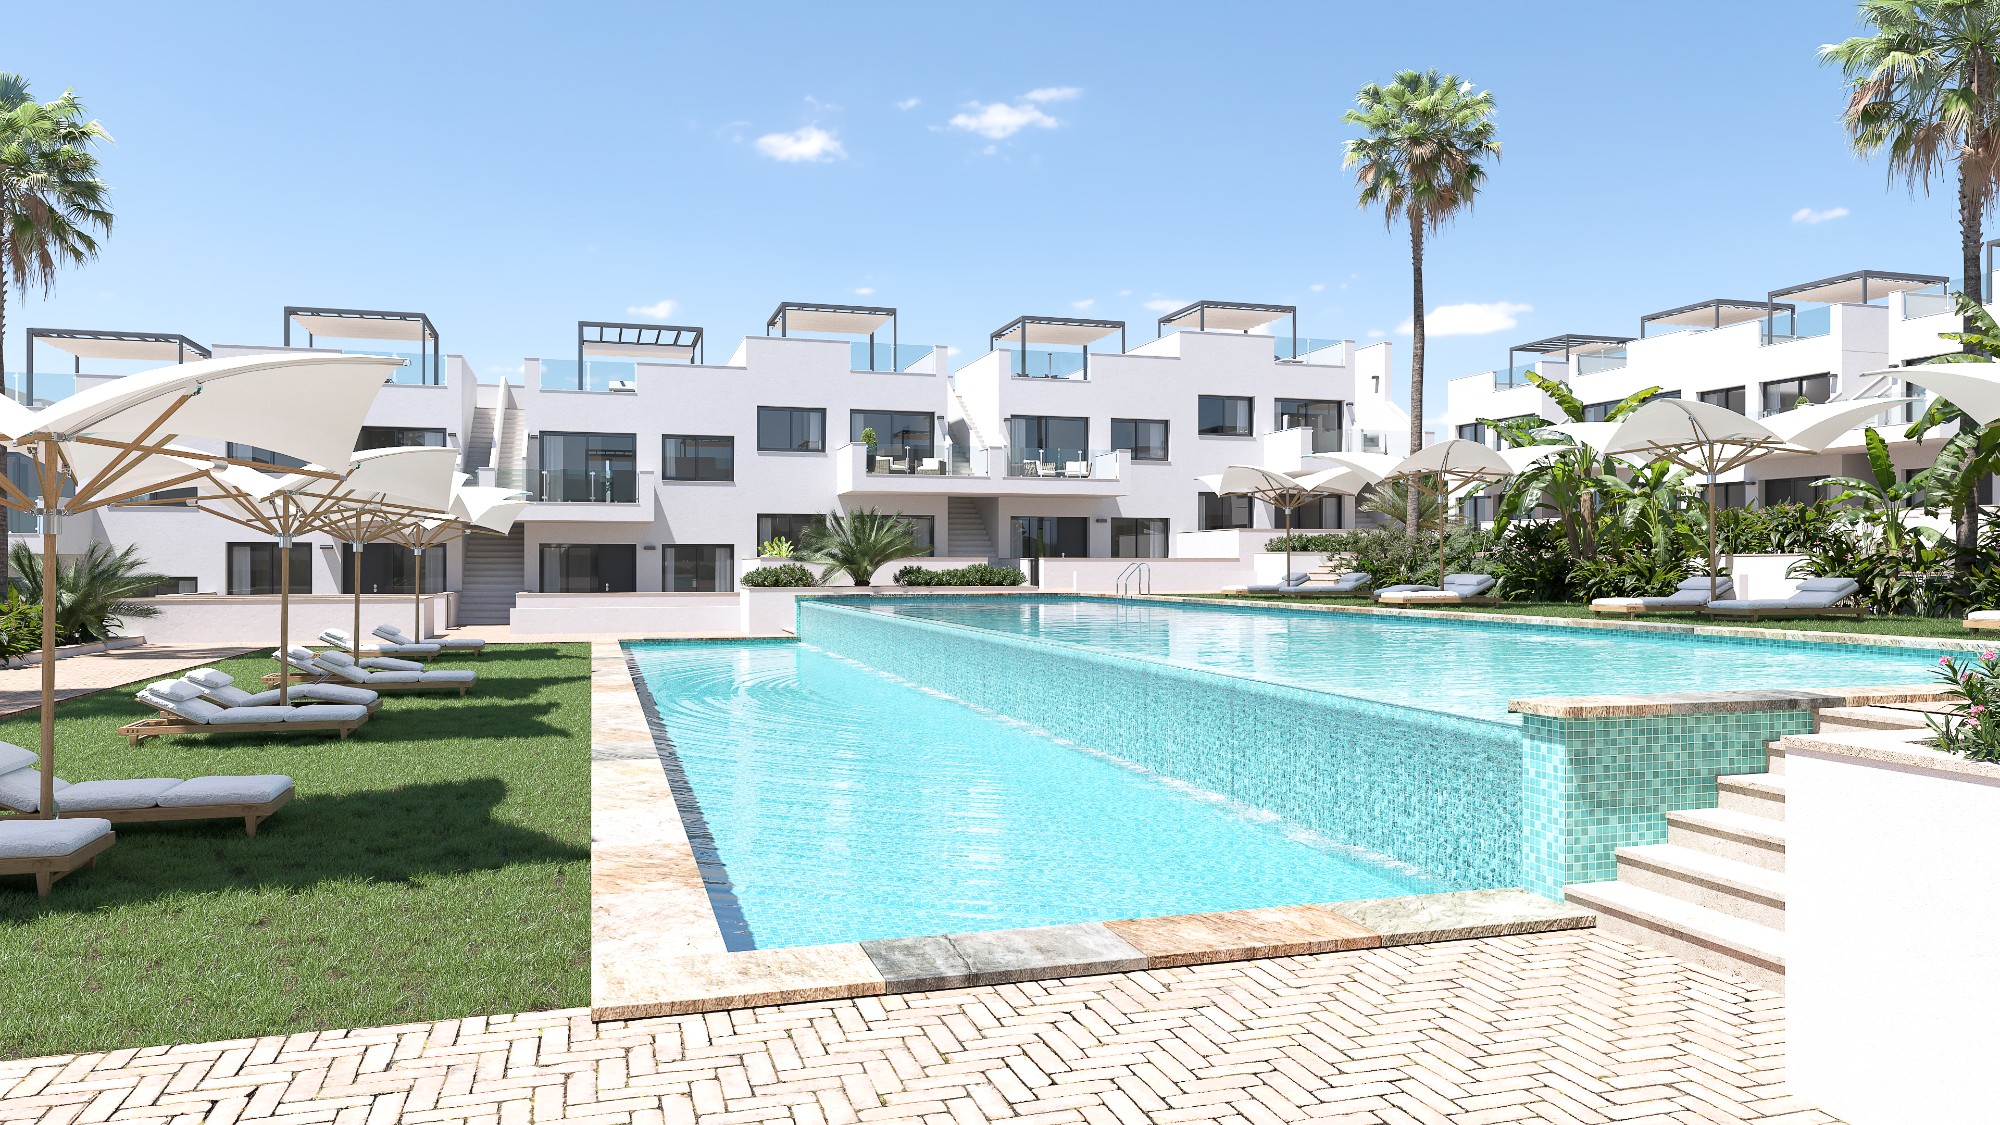 Property Image 571209-torrevieja-townhouses-2-2